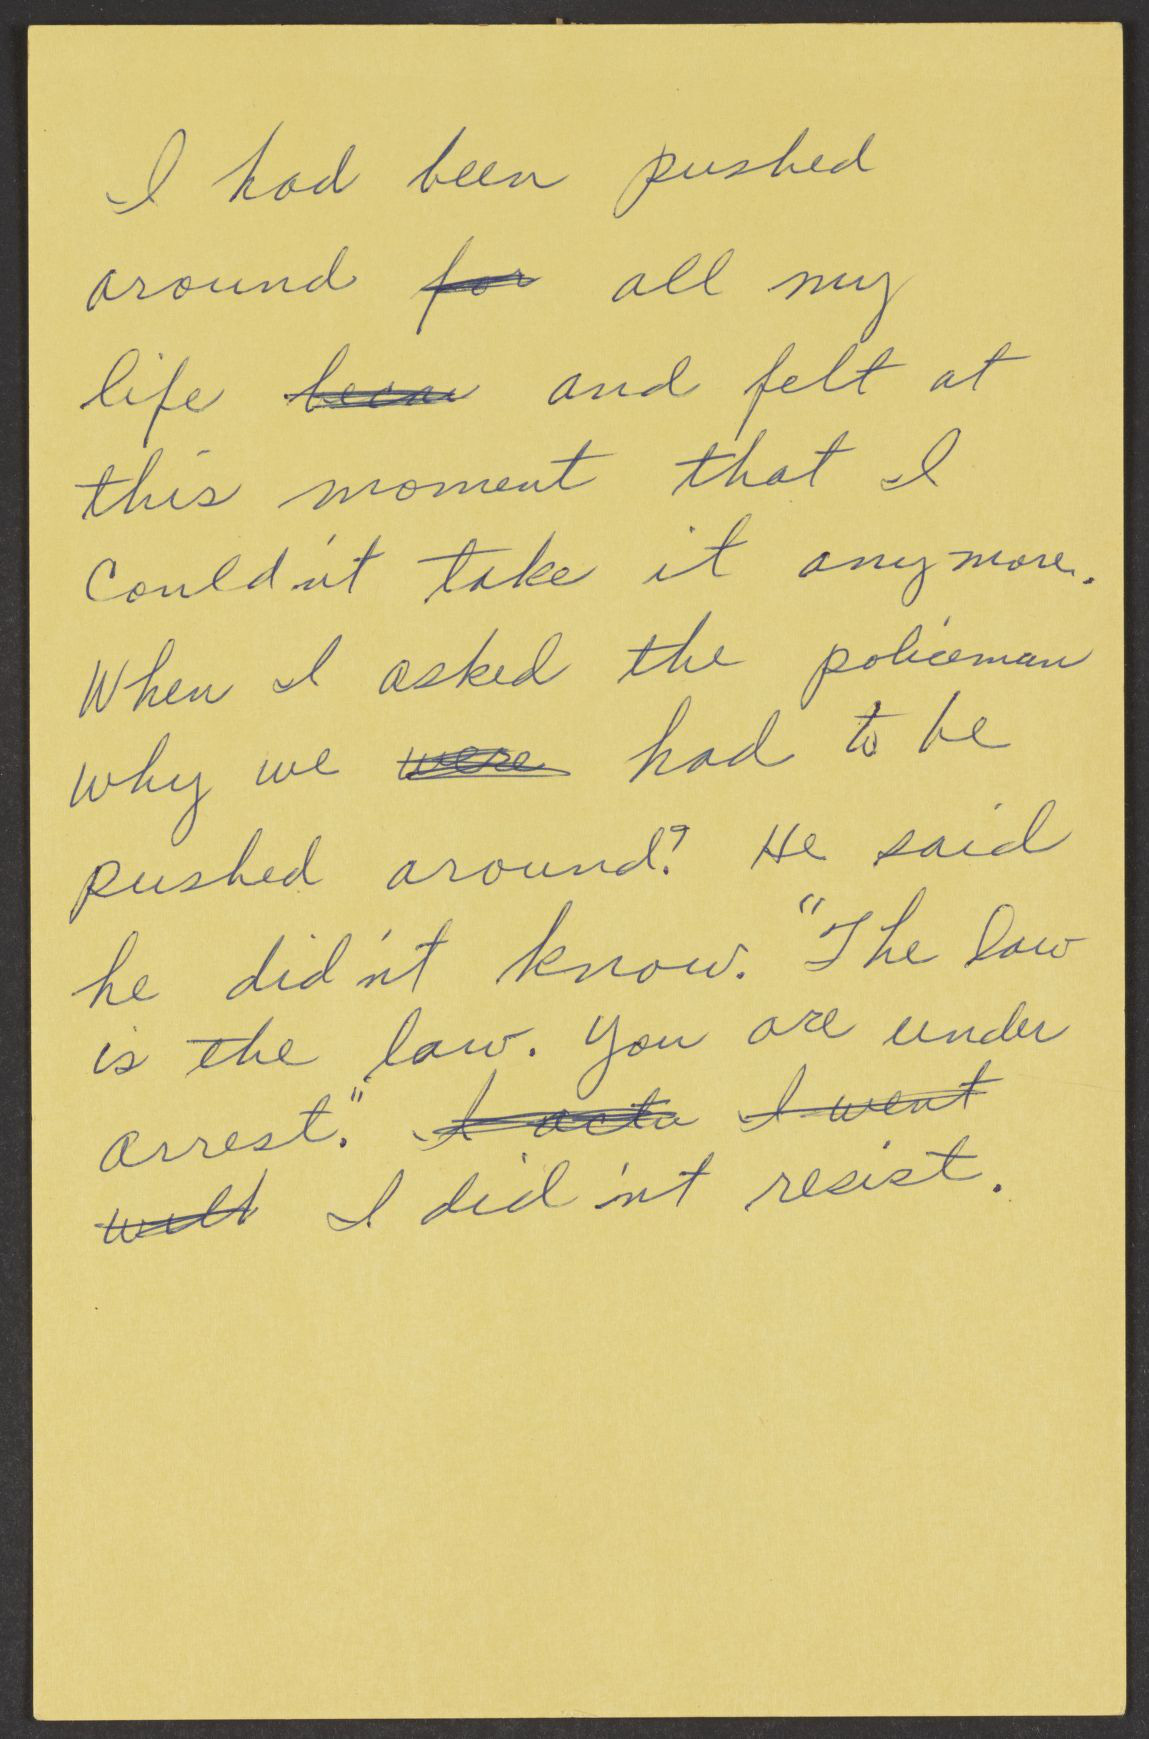 Rosa Parks' handwritten reflections on her arrest for refusing to surrender her seat to a white passenger.